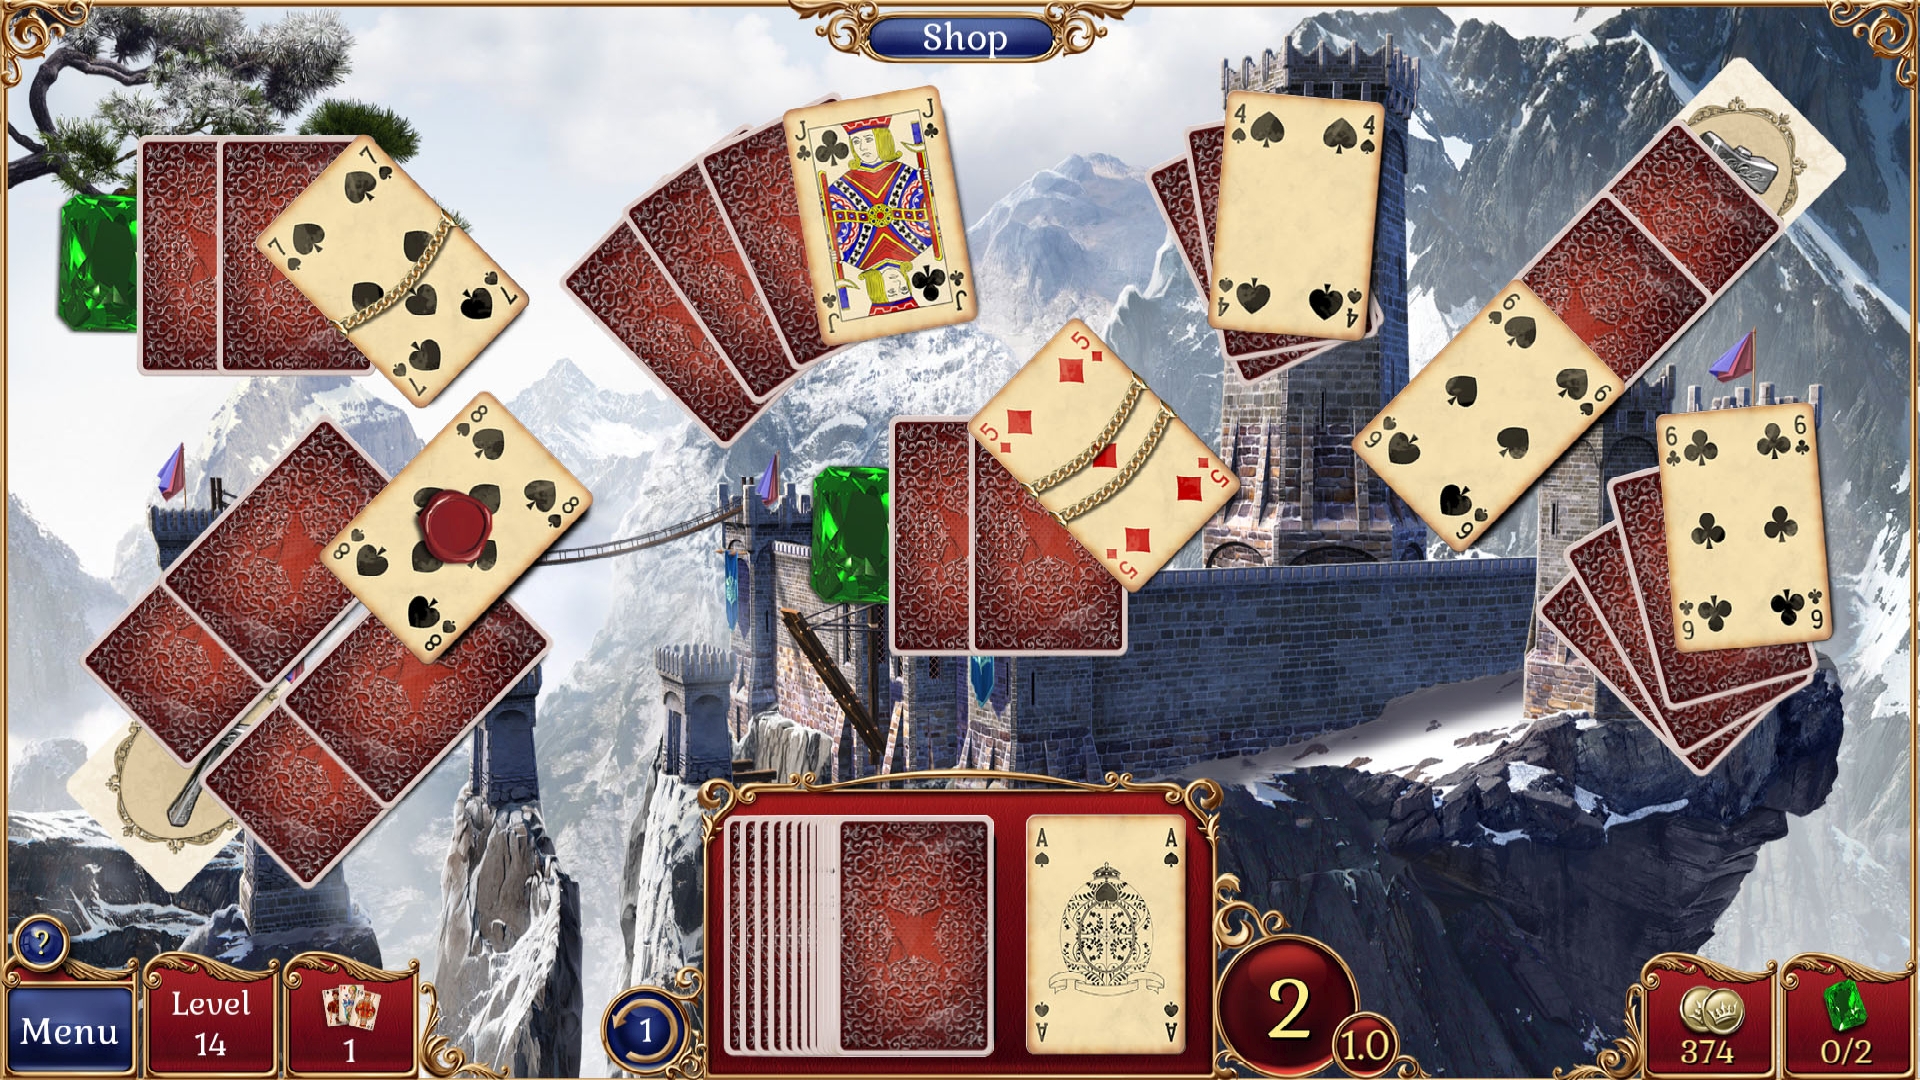 Jewel Match Solitaire 2 Collector's Edition Steam CD Key 6.19 $